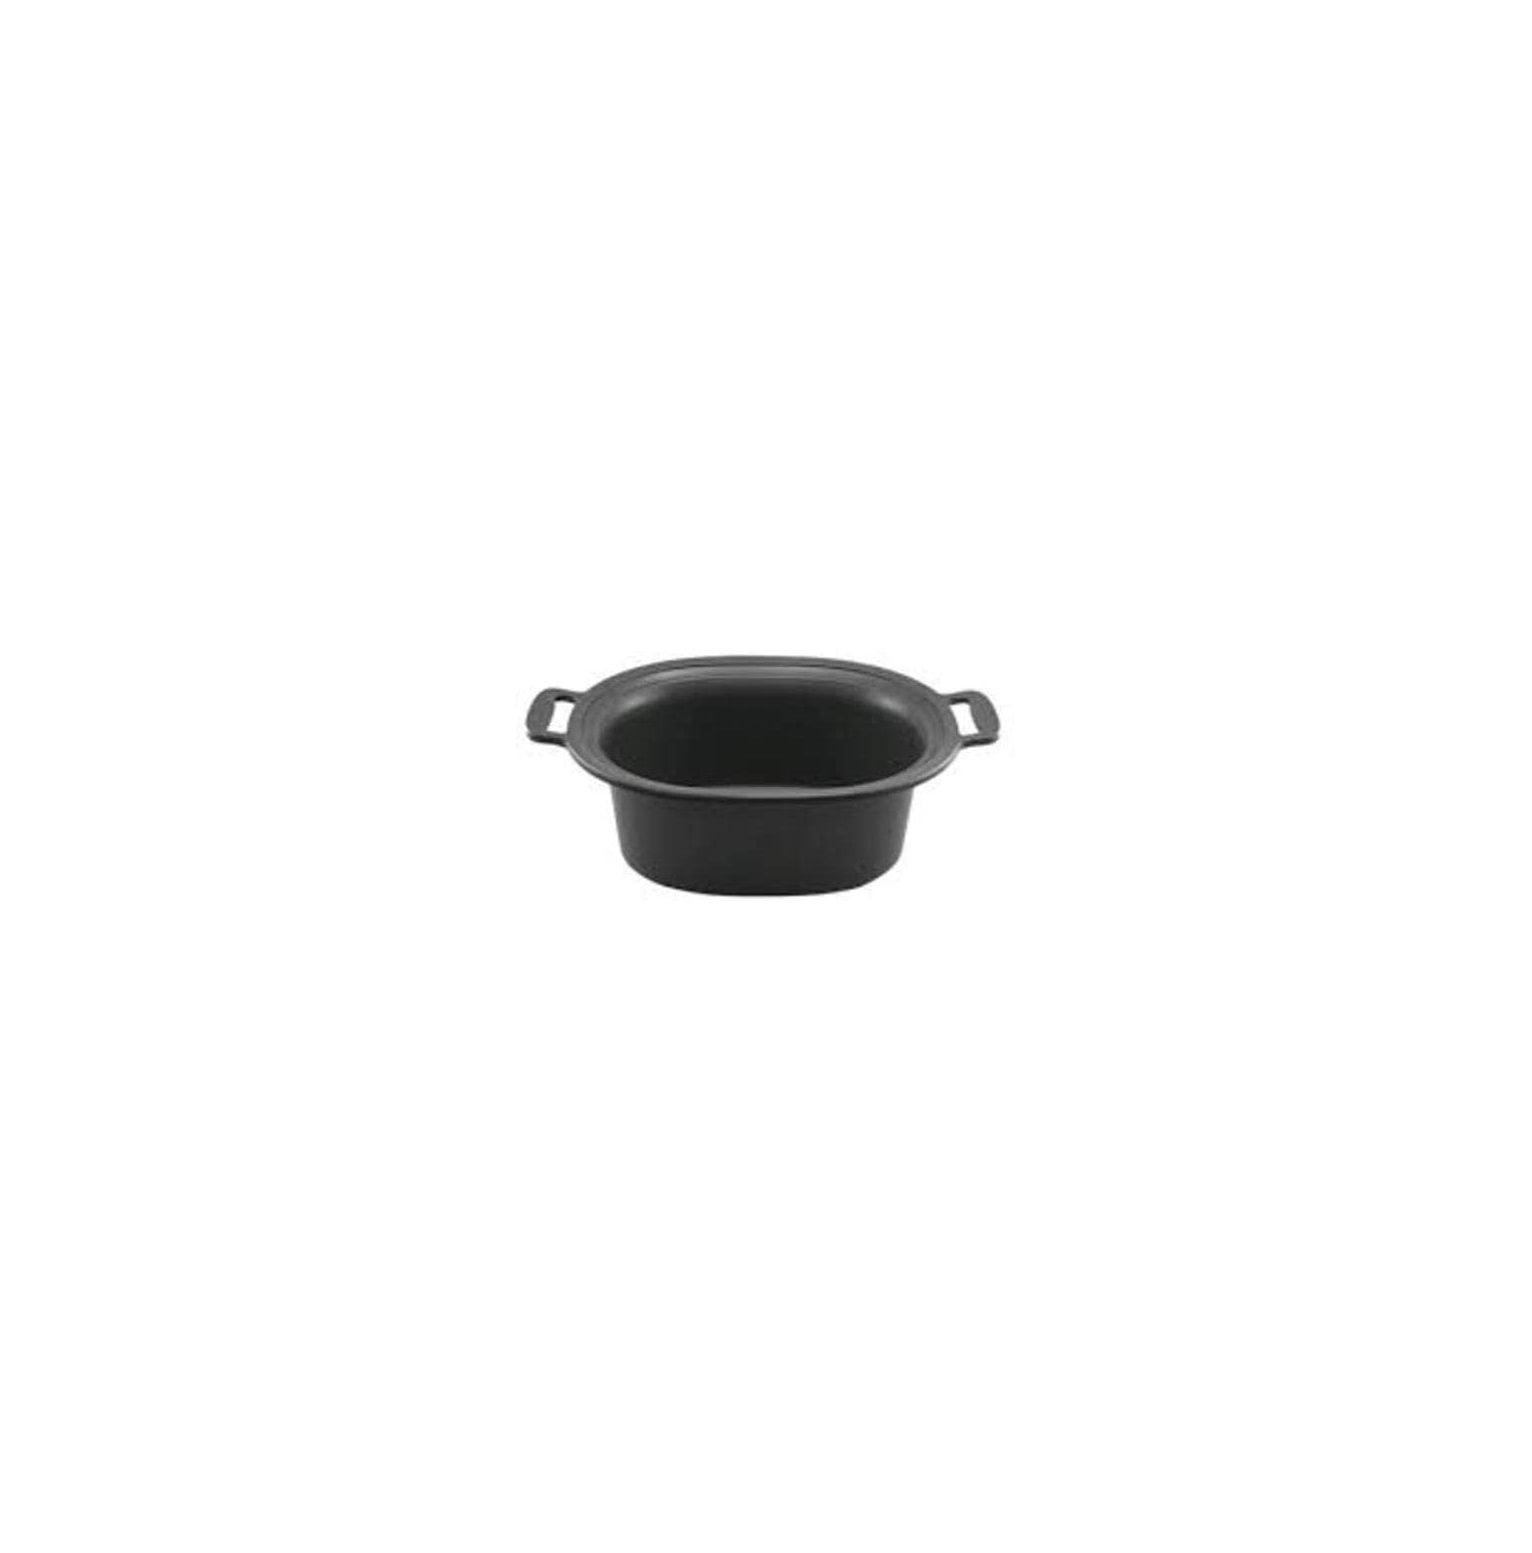 All-Clad Replacement Ceramic Insert for Slow Cooker - White